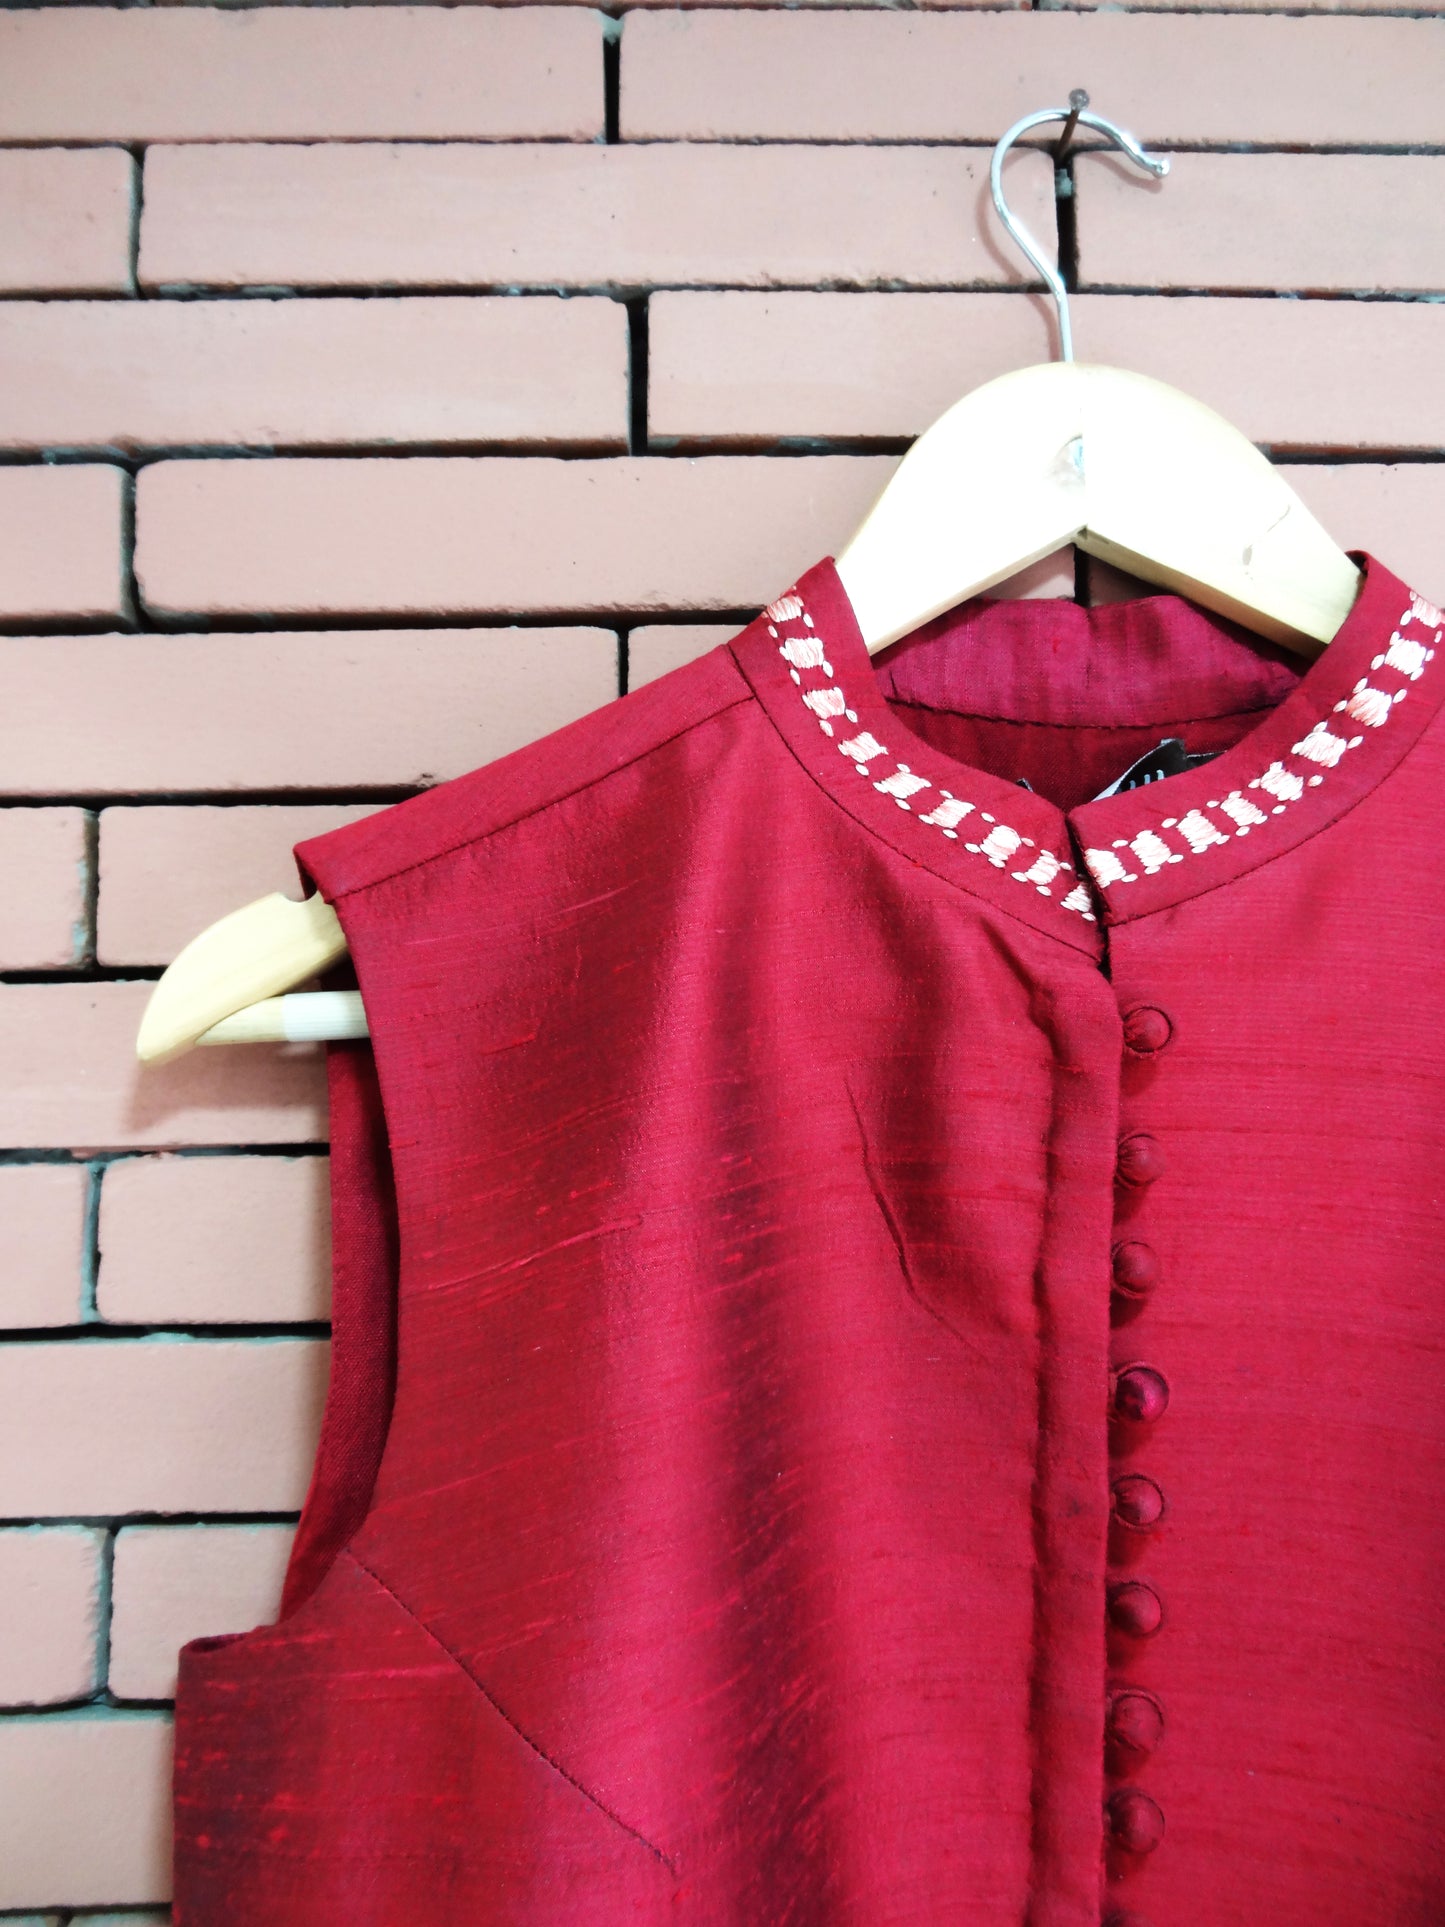 Nakshi Hand Embroided Maroon Coloured Dupion Silk Women's Nehru Jacket With Pockets & Lining Details